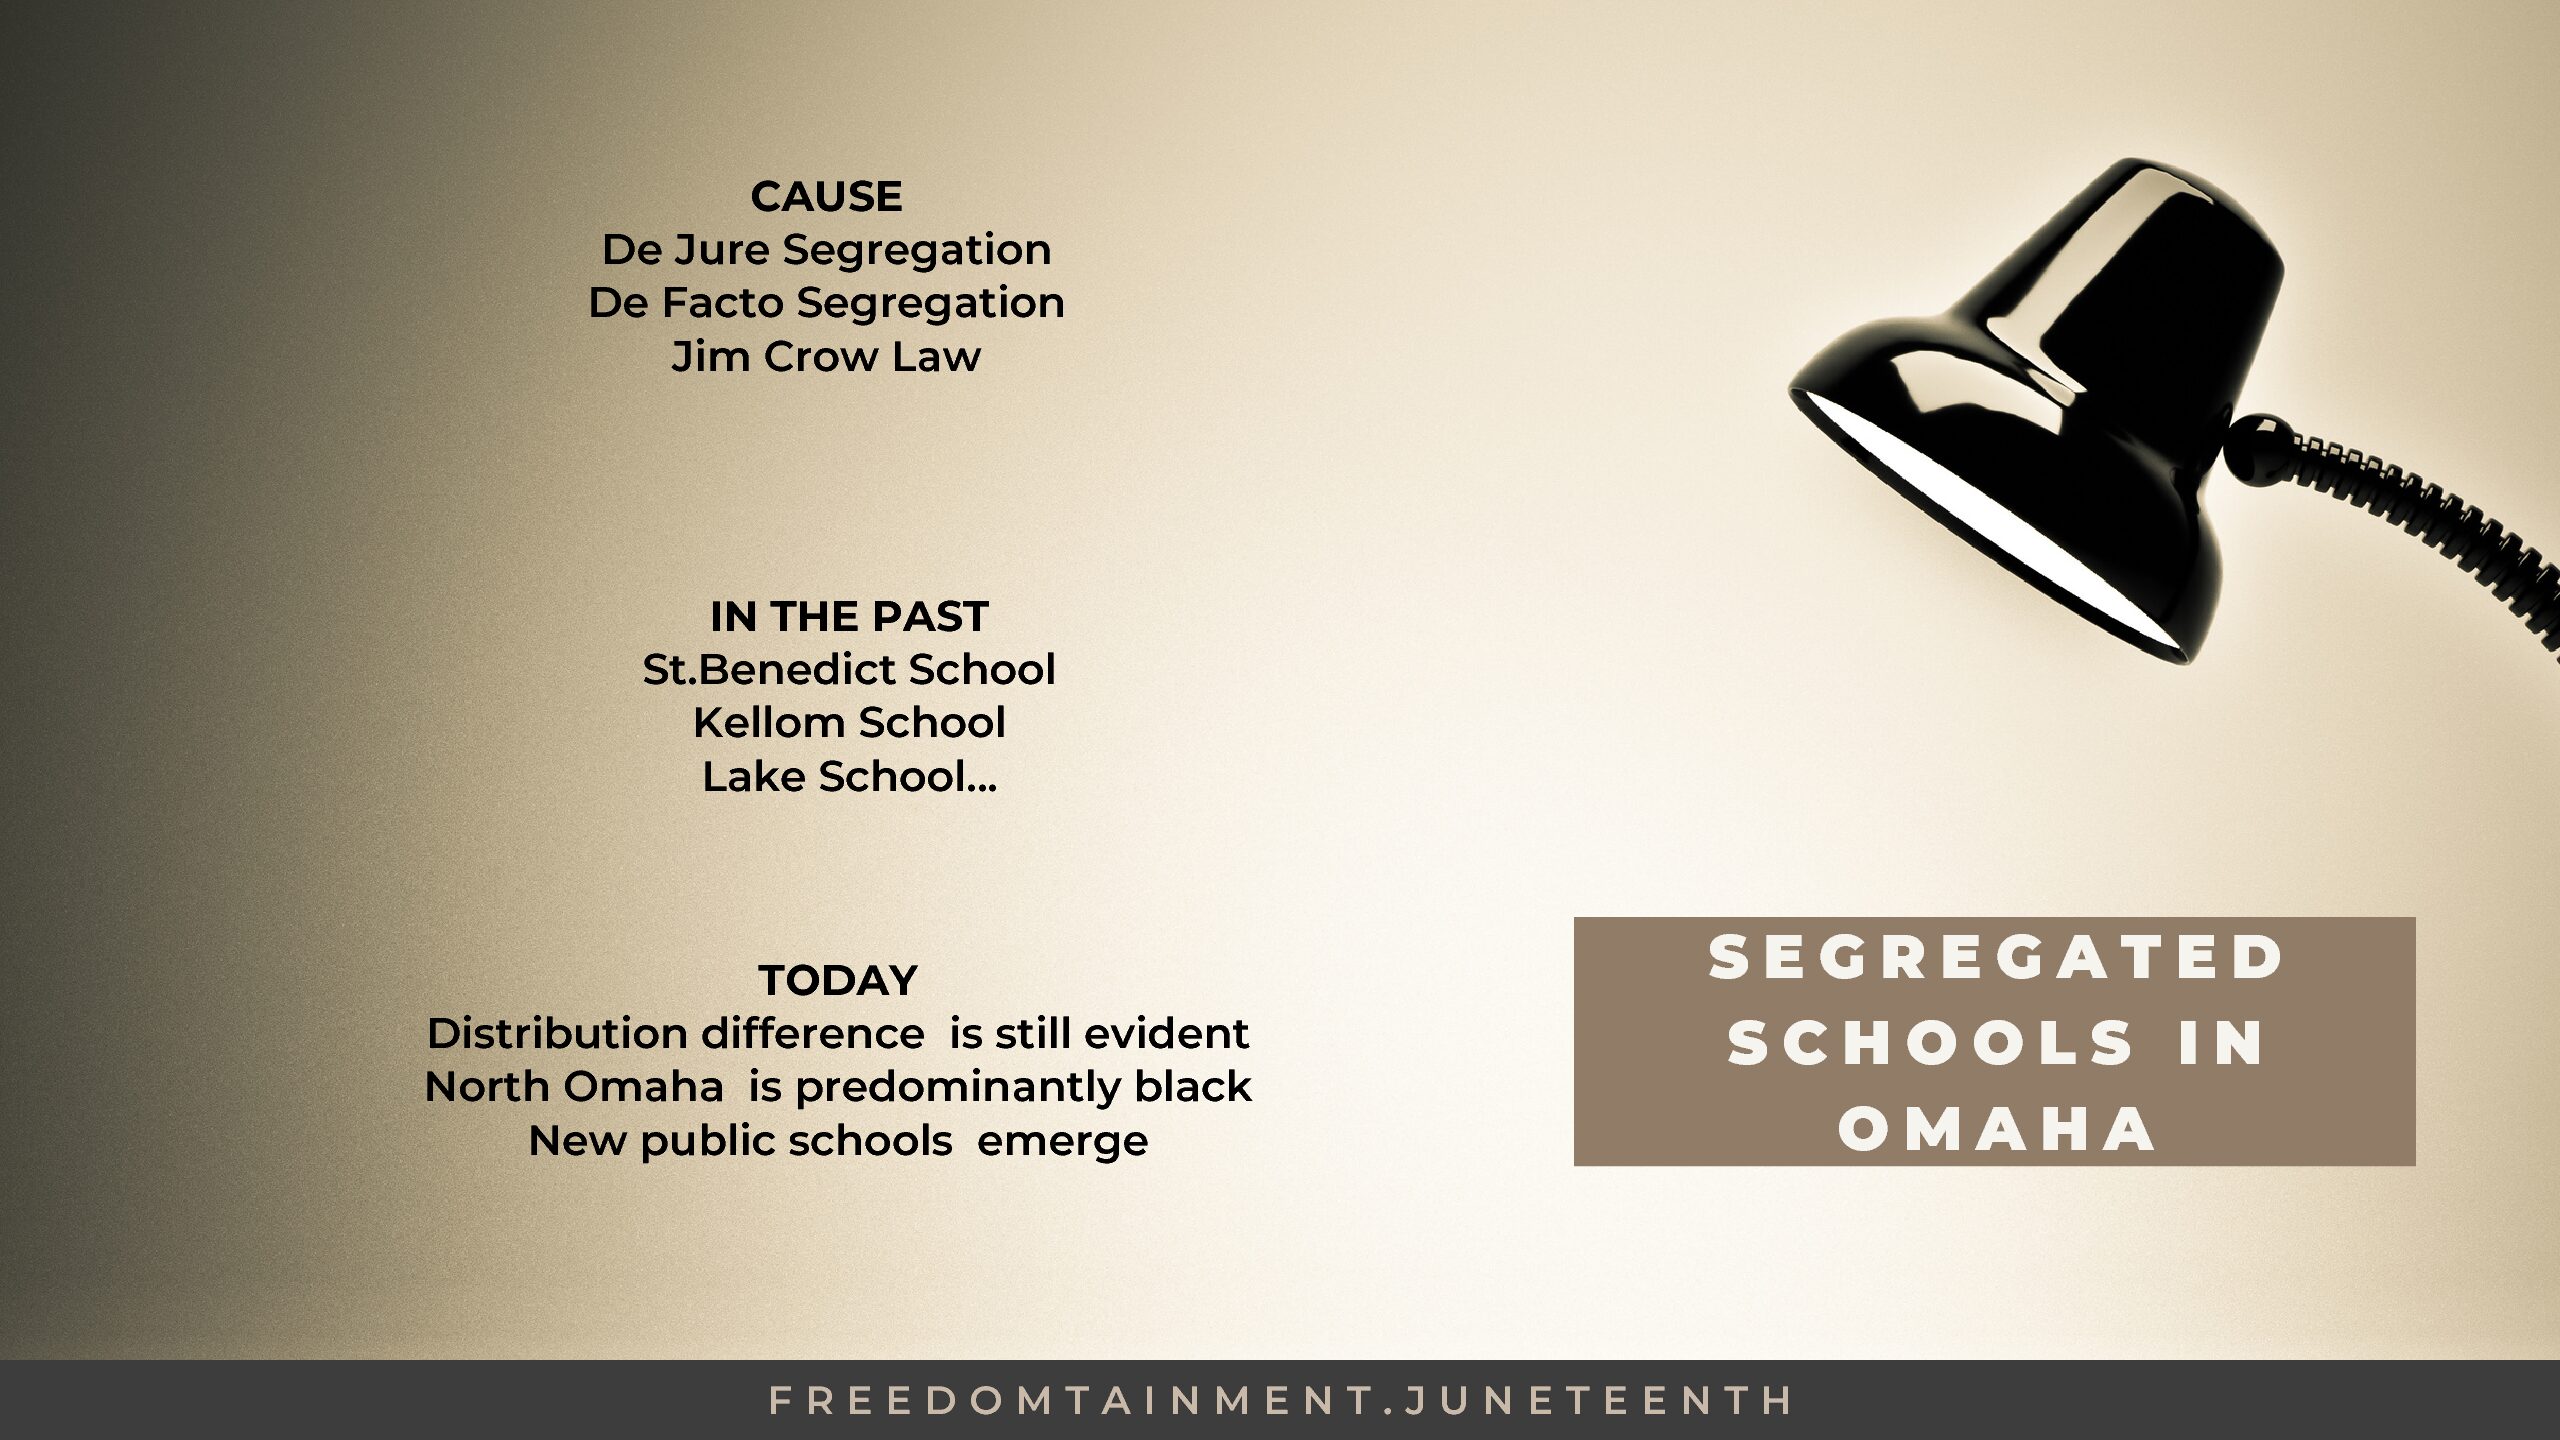  Brief Introduction to Segregated Schools in Omaha